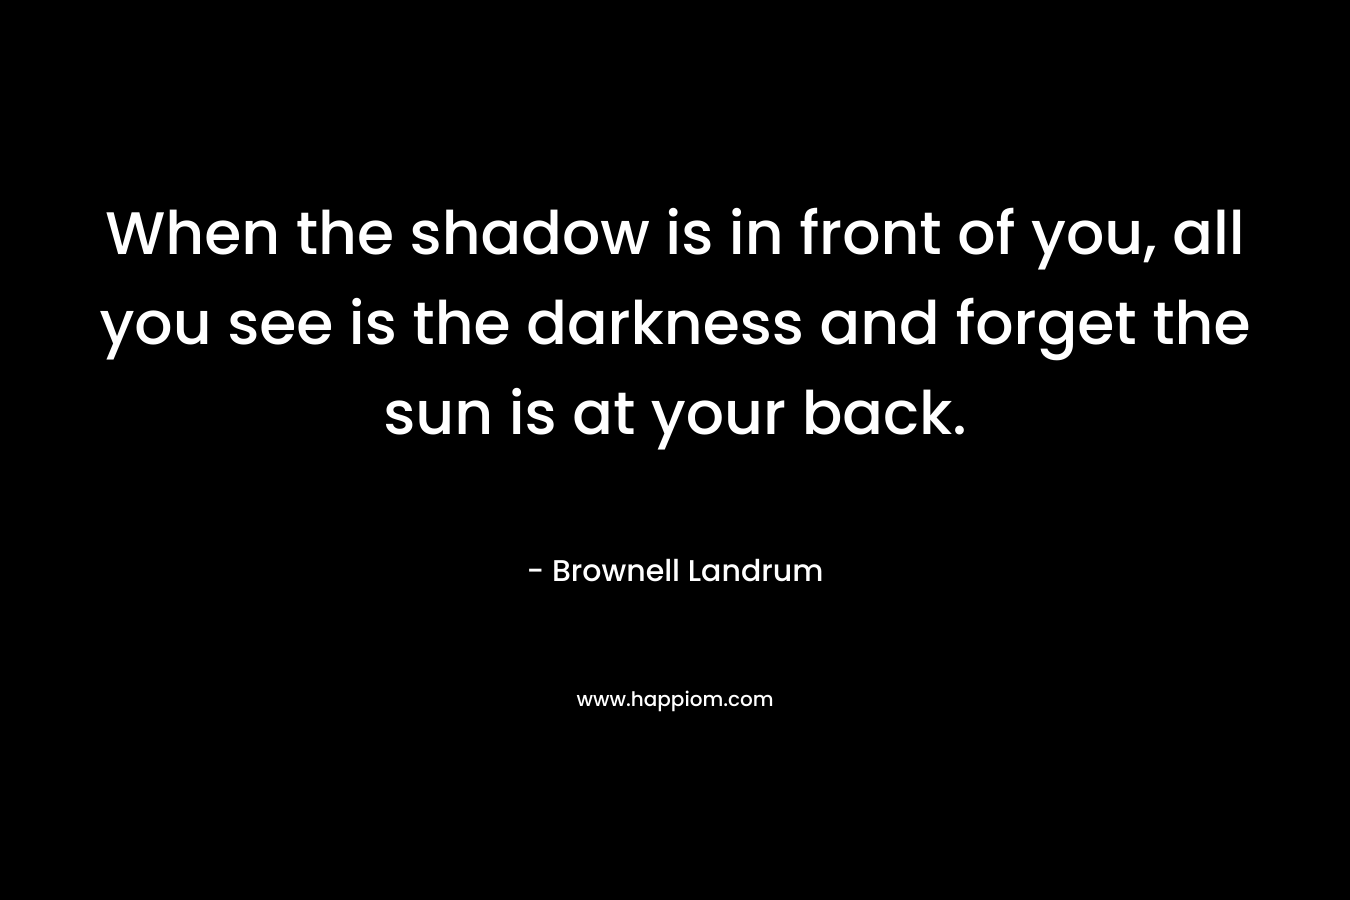 When the shadow is in front of you, all you see is the darkness and forget the sun is at your back.